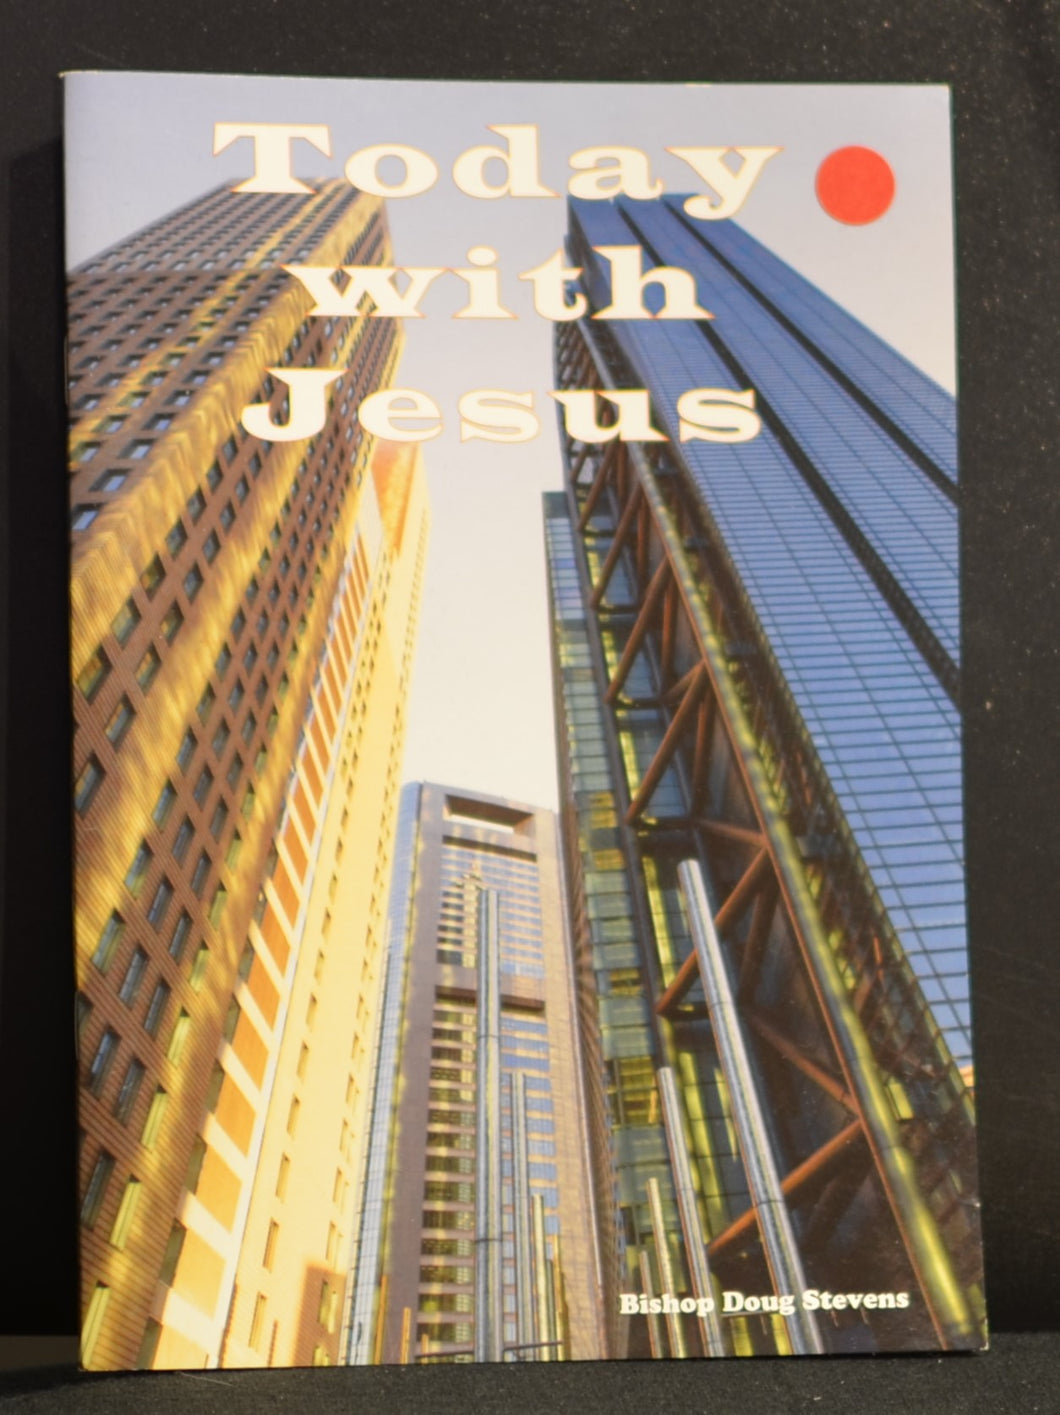 Today With Jesus - 50% off